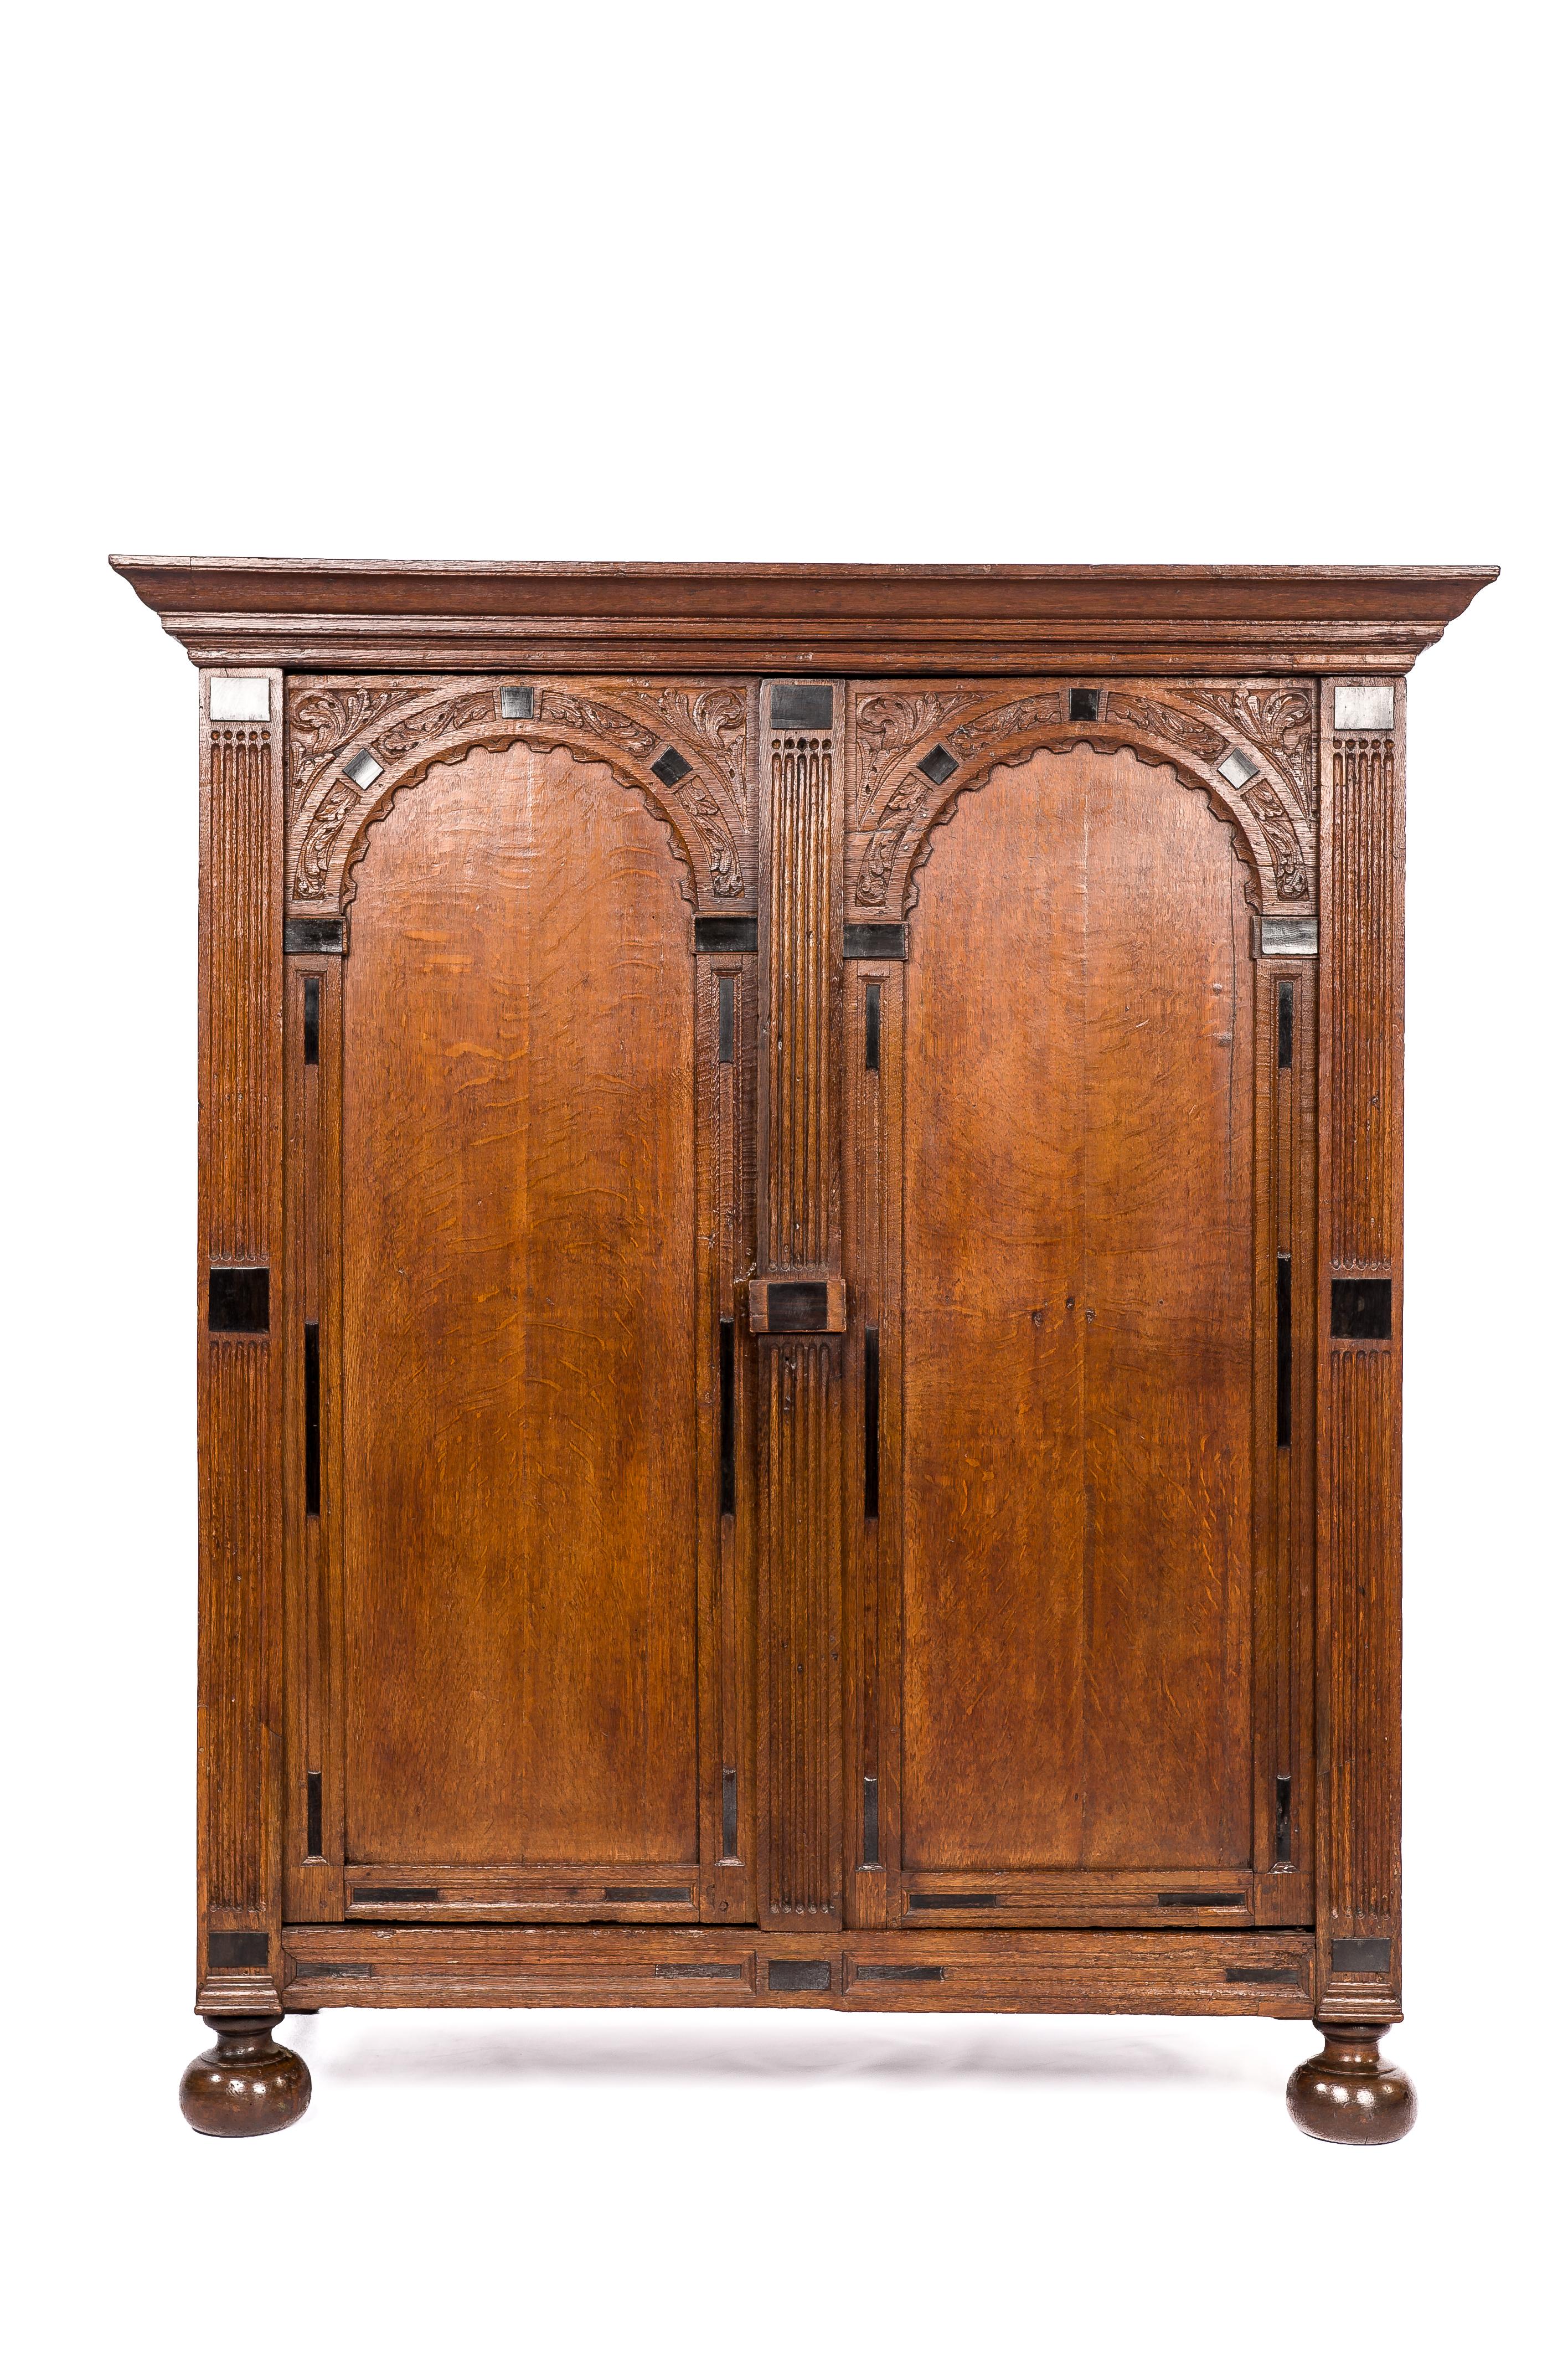 On offer here is an exceptional Dutch cupboard made of the finest European summer oak in the tradition of the Dutch Renaissance during the “Dutch golden age” 
This cabinet is made in the Provence of Utrecht, circa 1680. The arched doors are typical